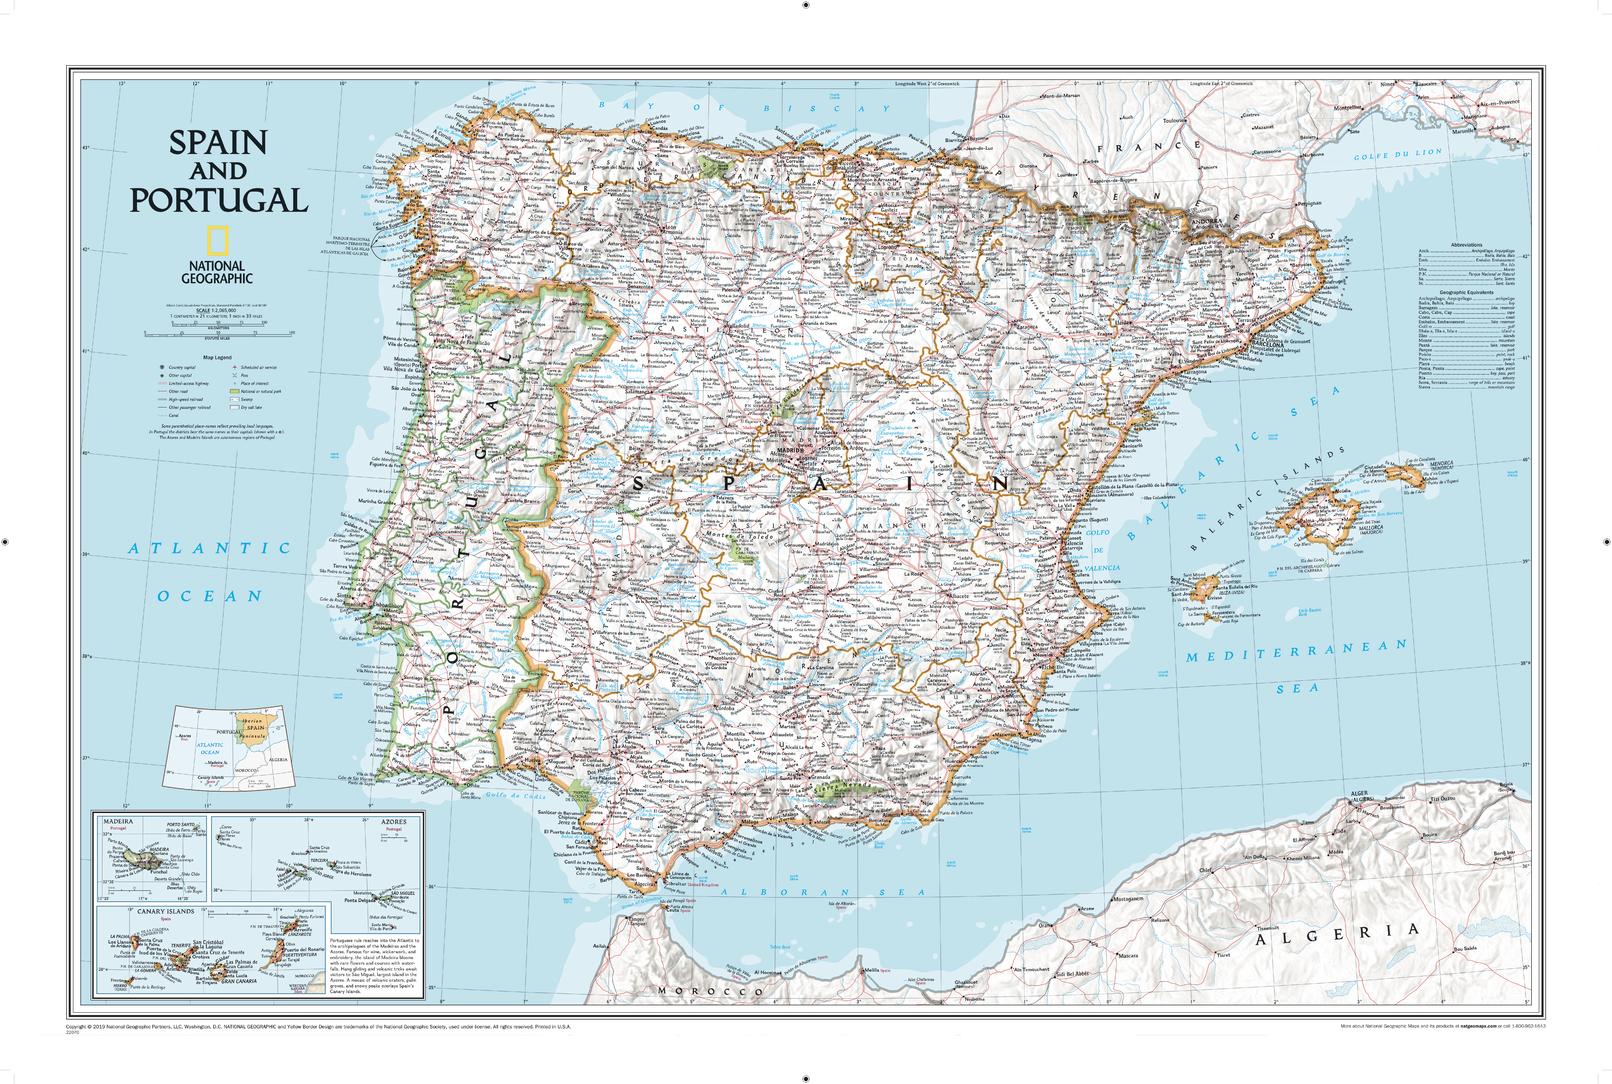 Spain & Portugal Wall Map by National Geographic (2007)